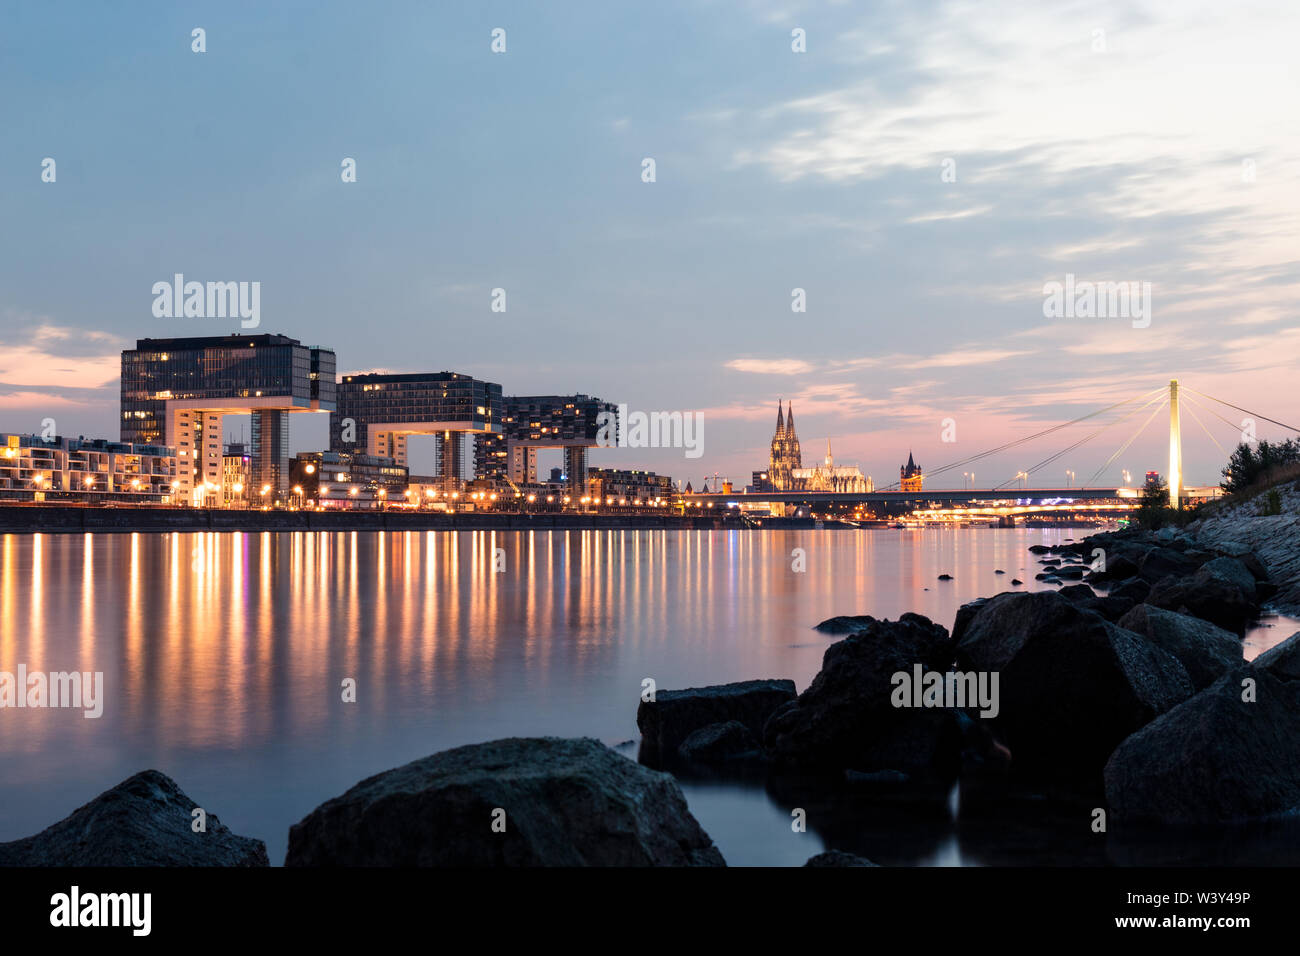 A wonderful long exposure in the evening, capturing the Rhine in the foreground and the crane houses with Cologne Cathedral in the background. Stock Photo